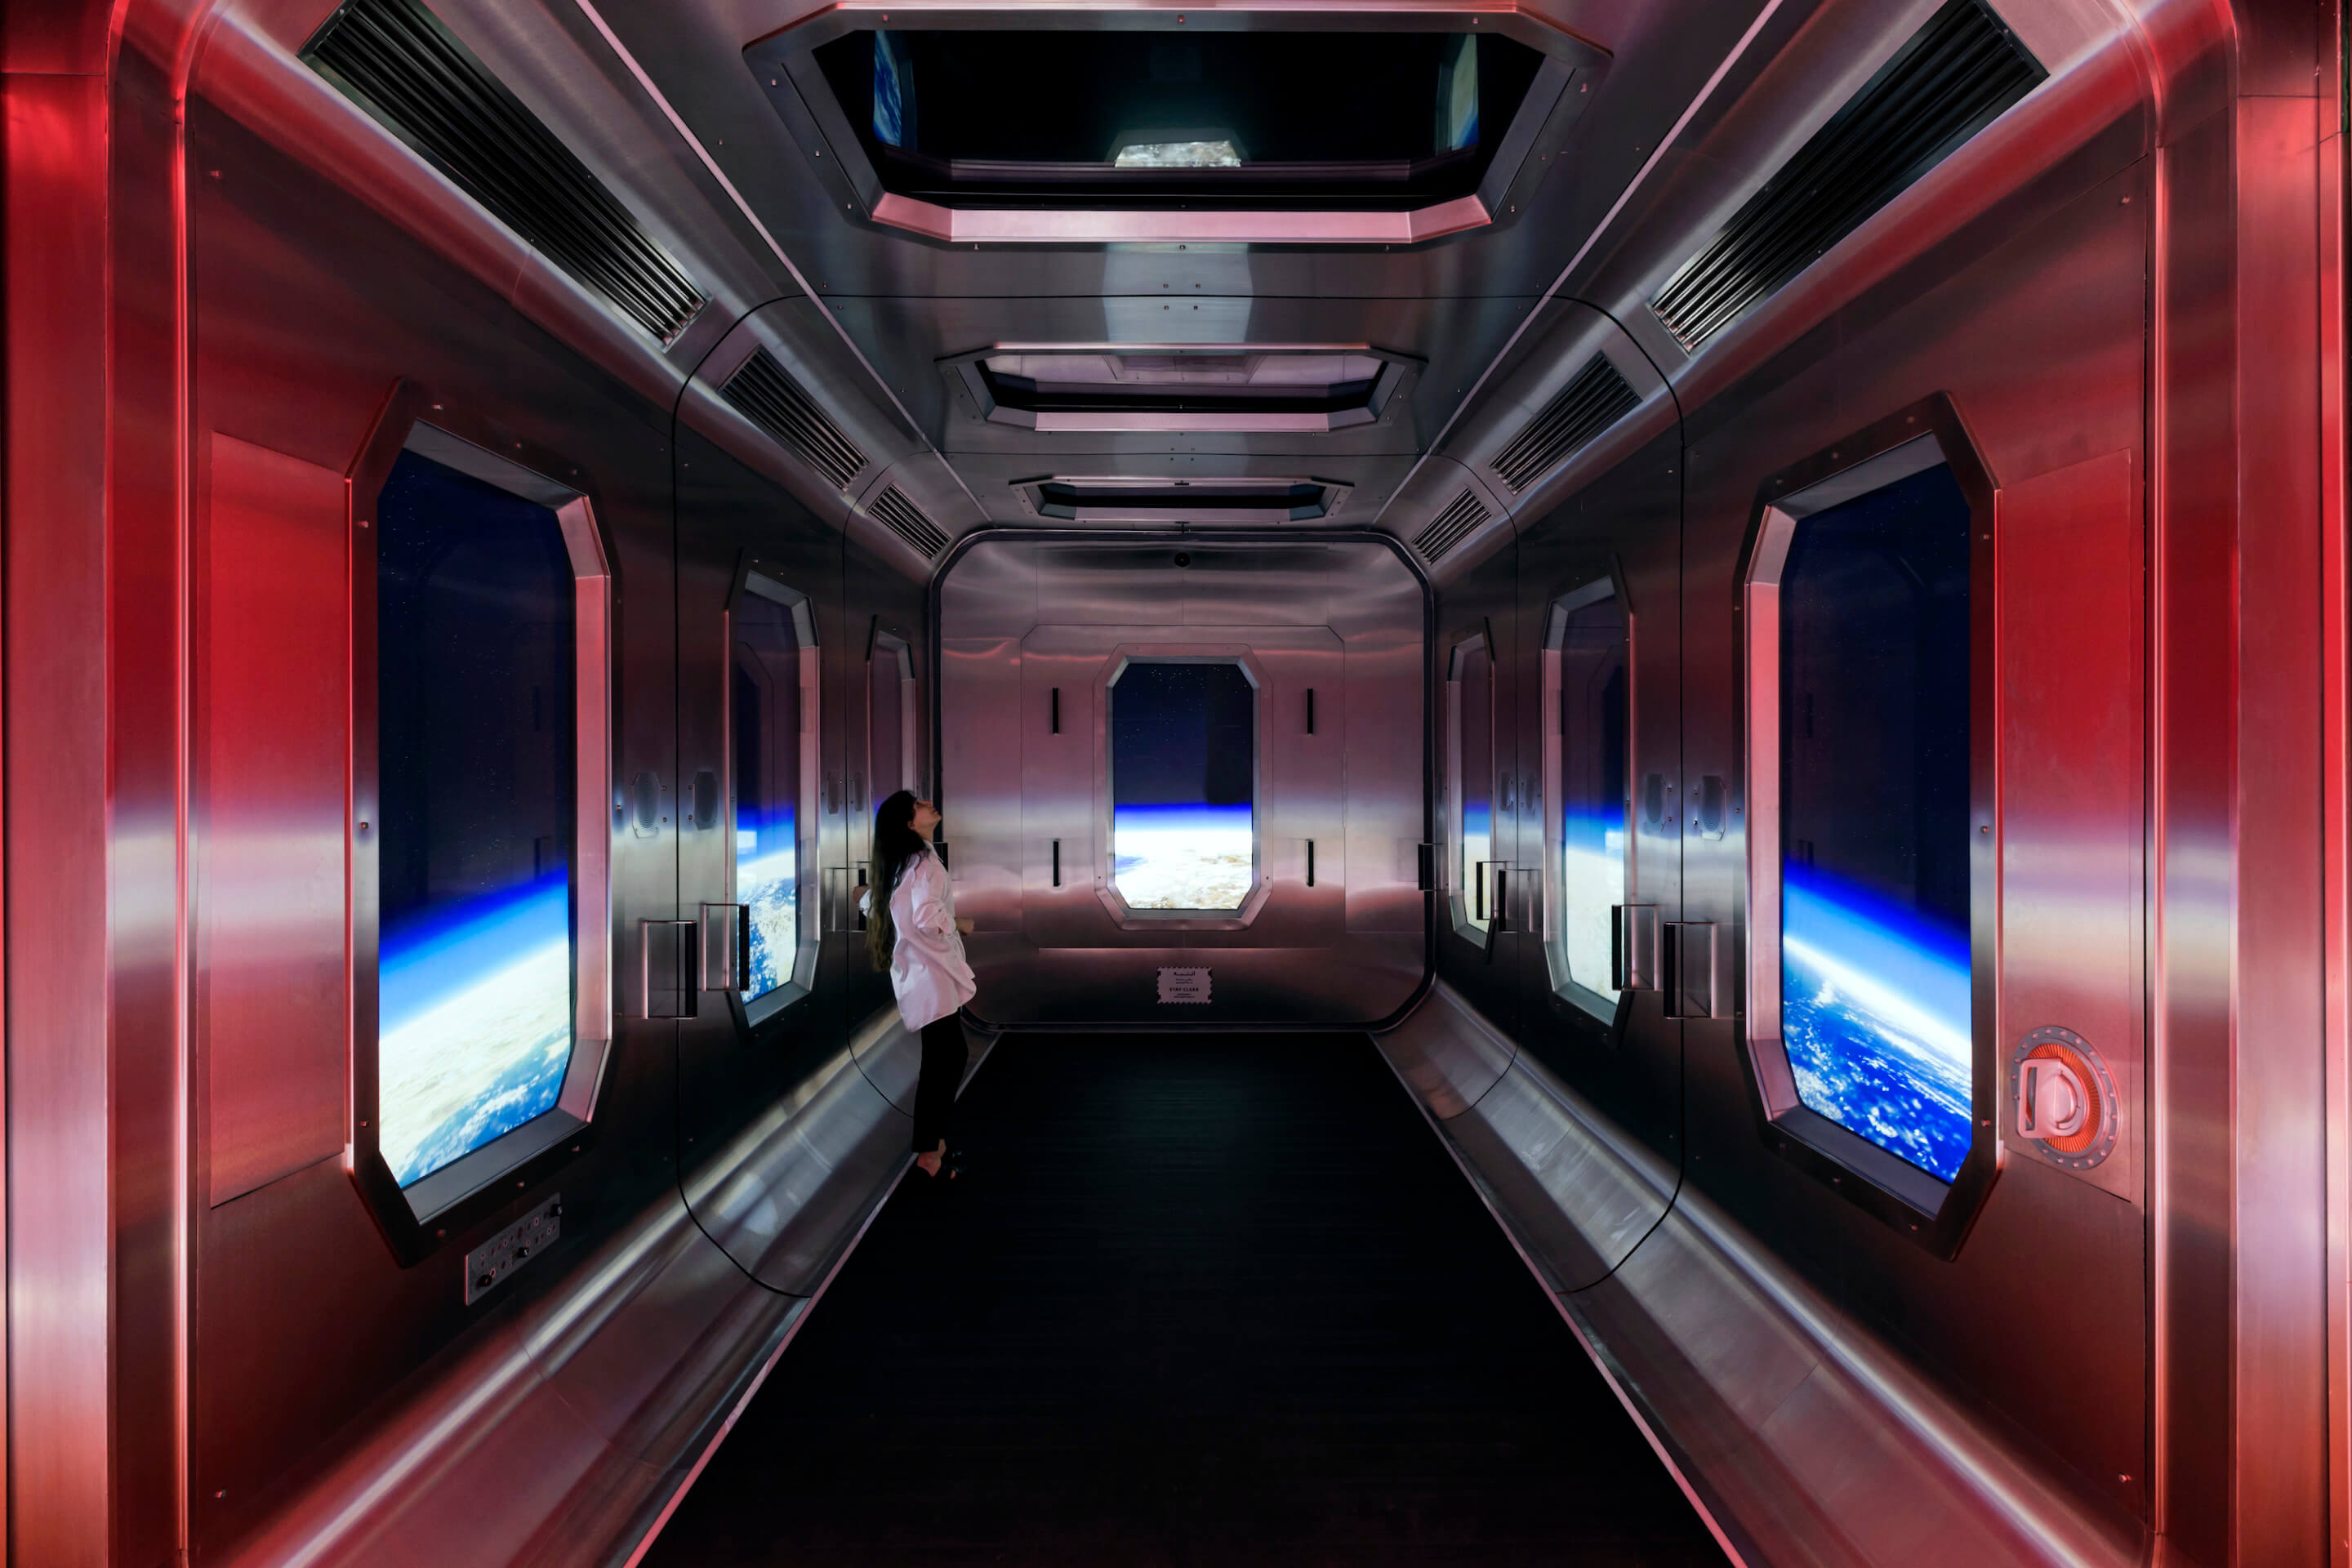 a person stands inside a large elevator fashioned as a space shuttle